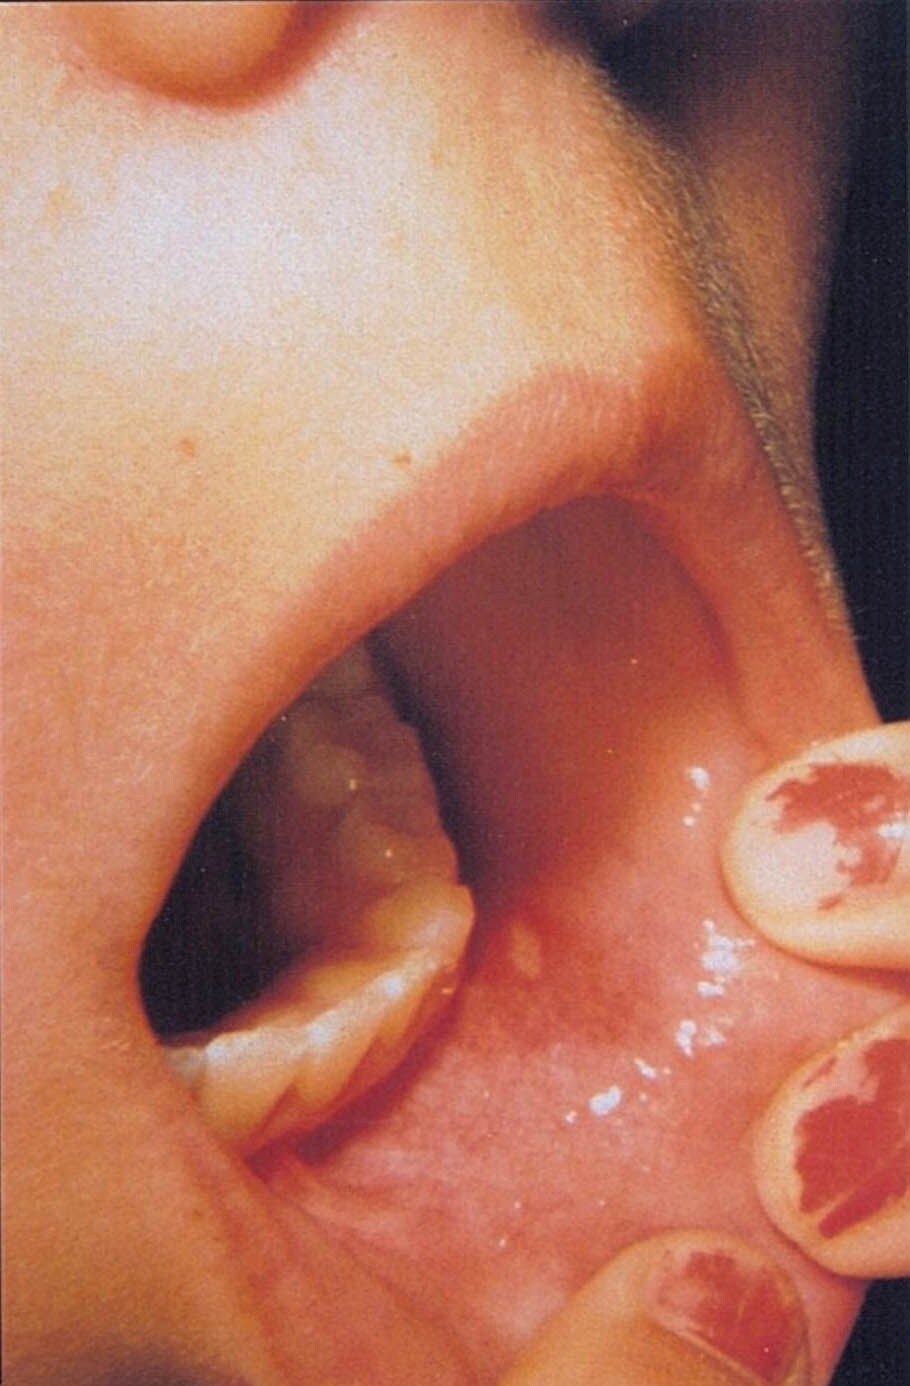 Hand-Foot-and-Mouth Disease (Oral Lesions)